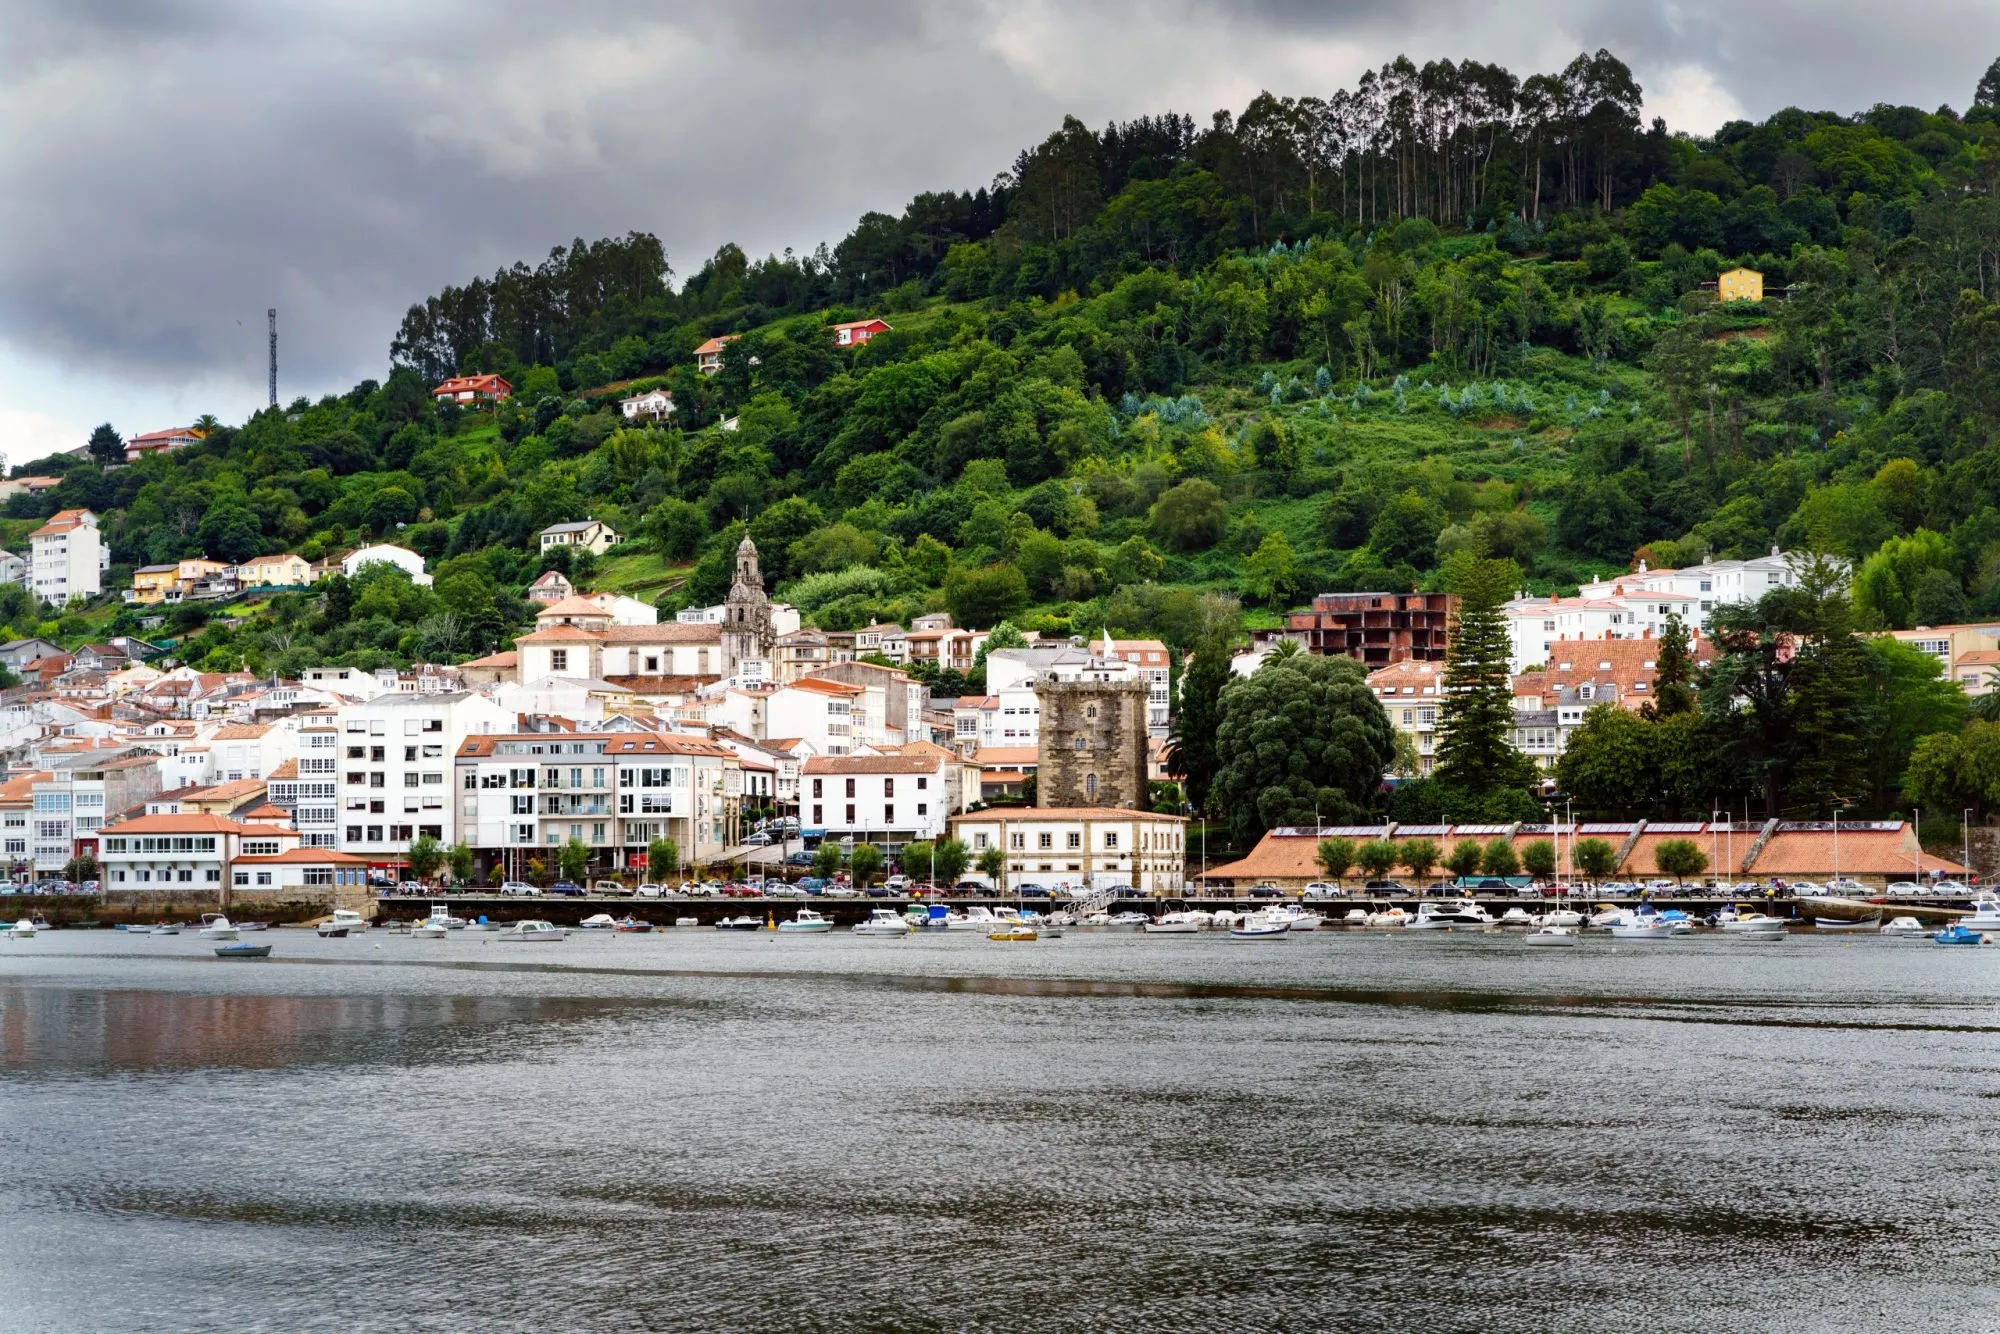 View of the town called Pontedeume in Galicia, Spain from the other side of the Eume estuary surrounded by a landscape with many trees and very green. Very cloudy sky threatening rain